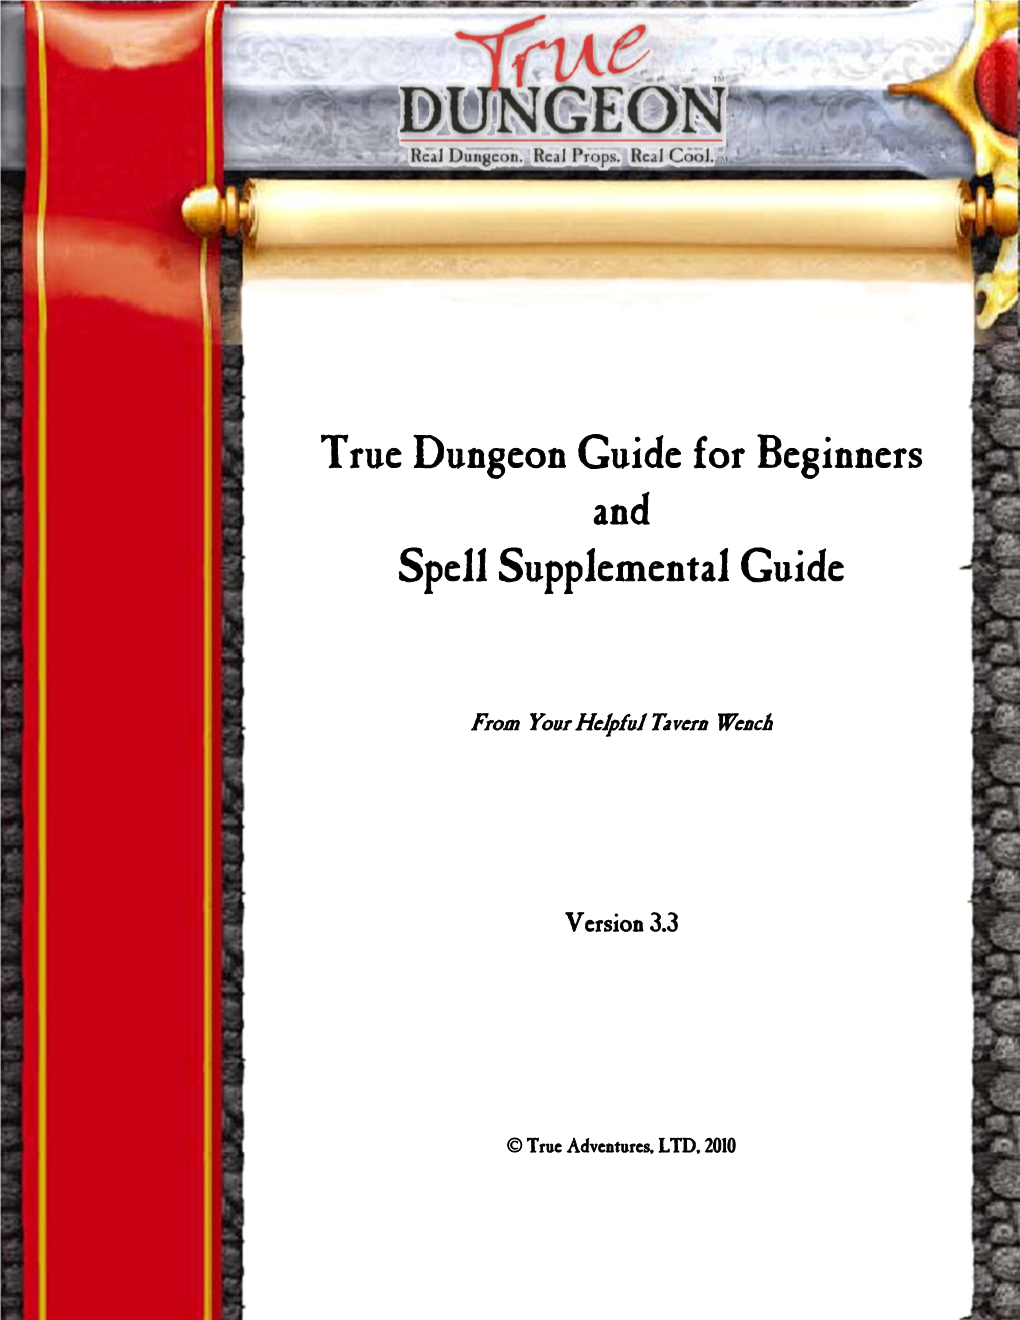 True Dungeon Guide for Beginners and Spell Supplemental Guide